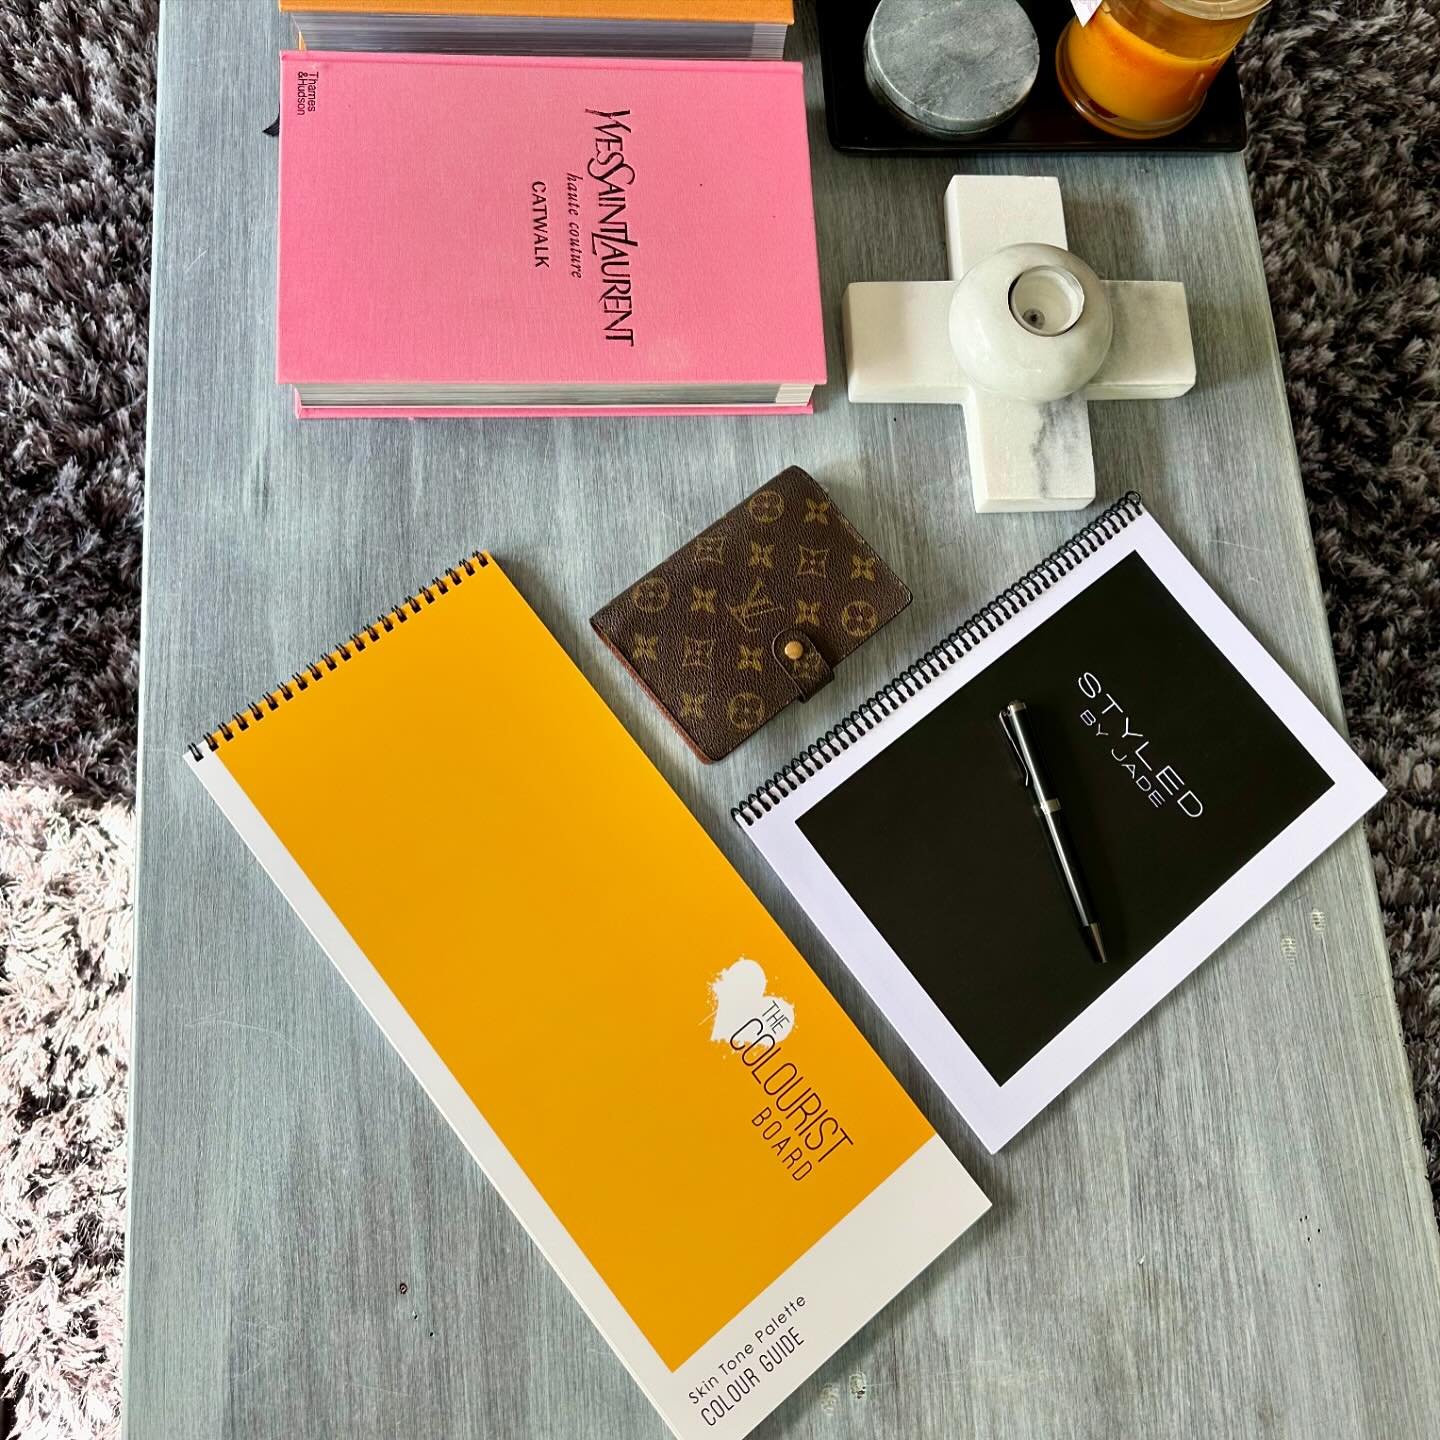 THE PERFECT COLOUR PALETTE BOARD 💛

I finally received this amazing colour guide&hellip; The perfect addition to every stylists tool kit, a guide to skin tone and seasonal colour pallets. 

Thank you @thecolouristboard this is such a fabulous tool. 